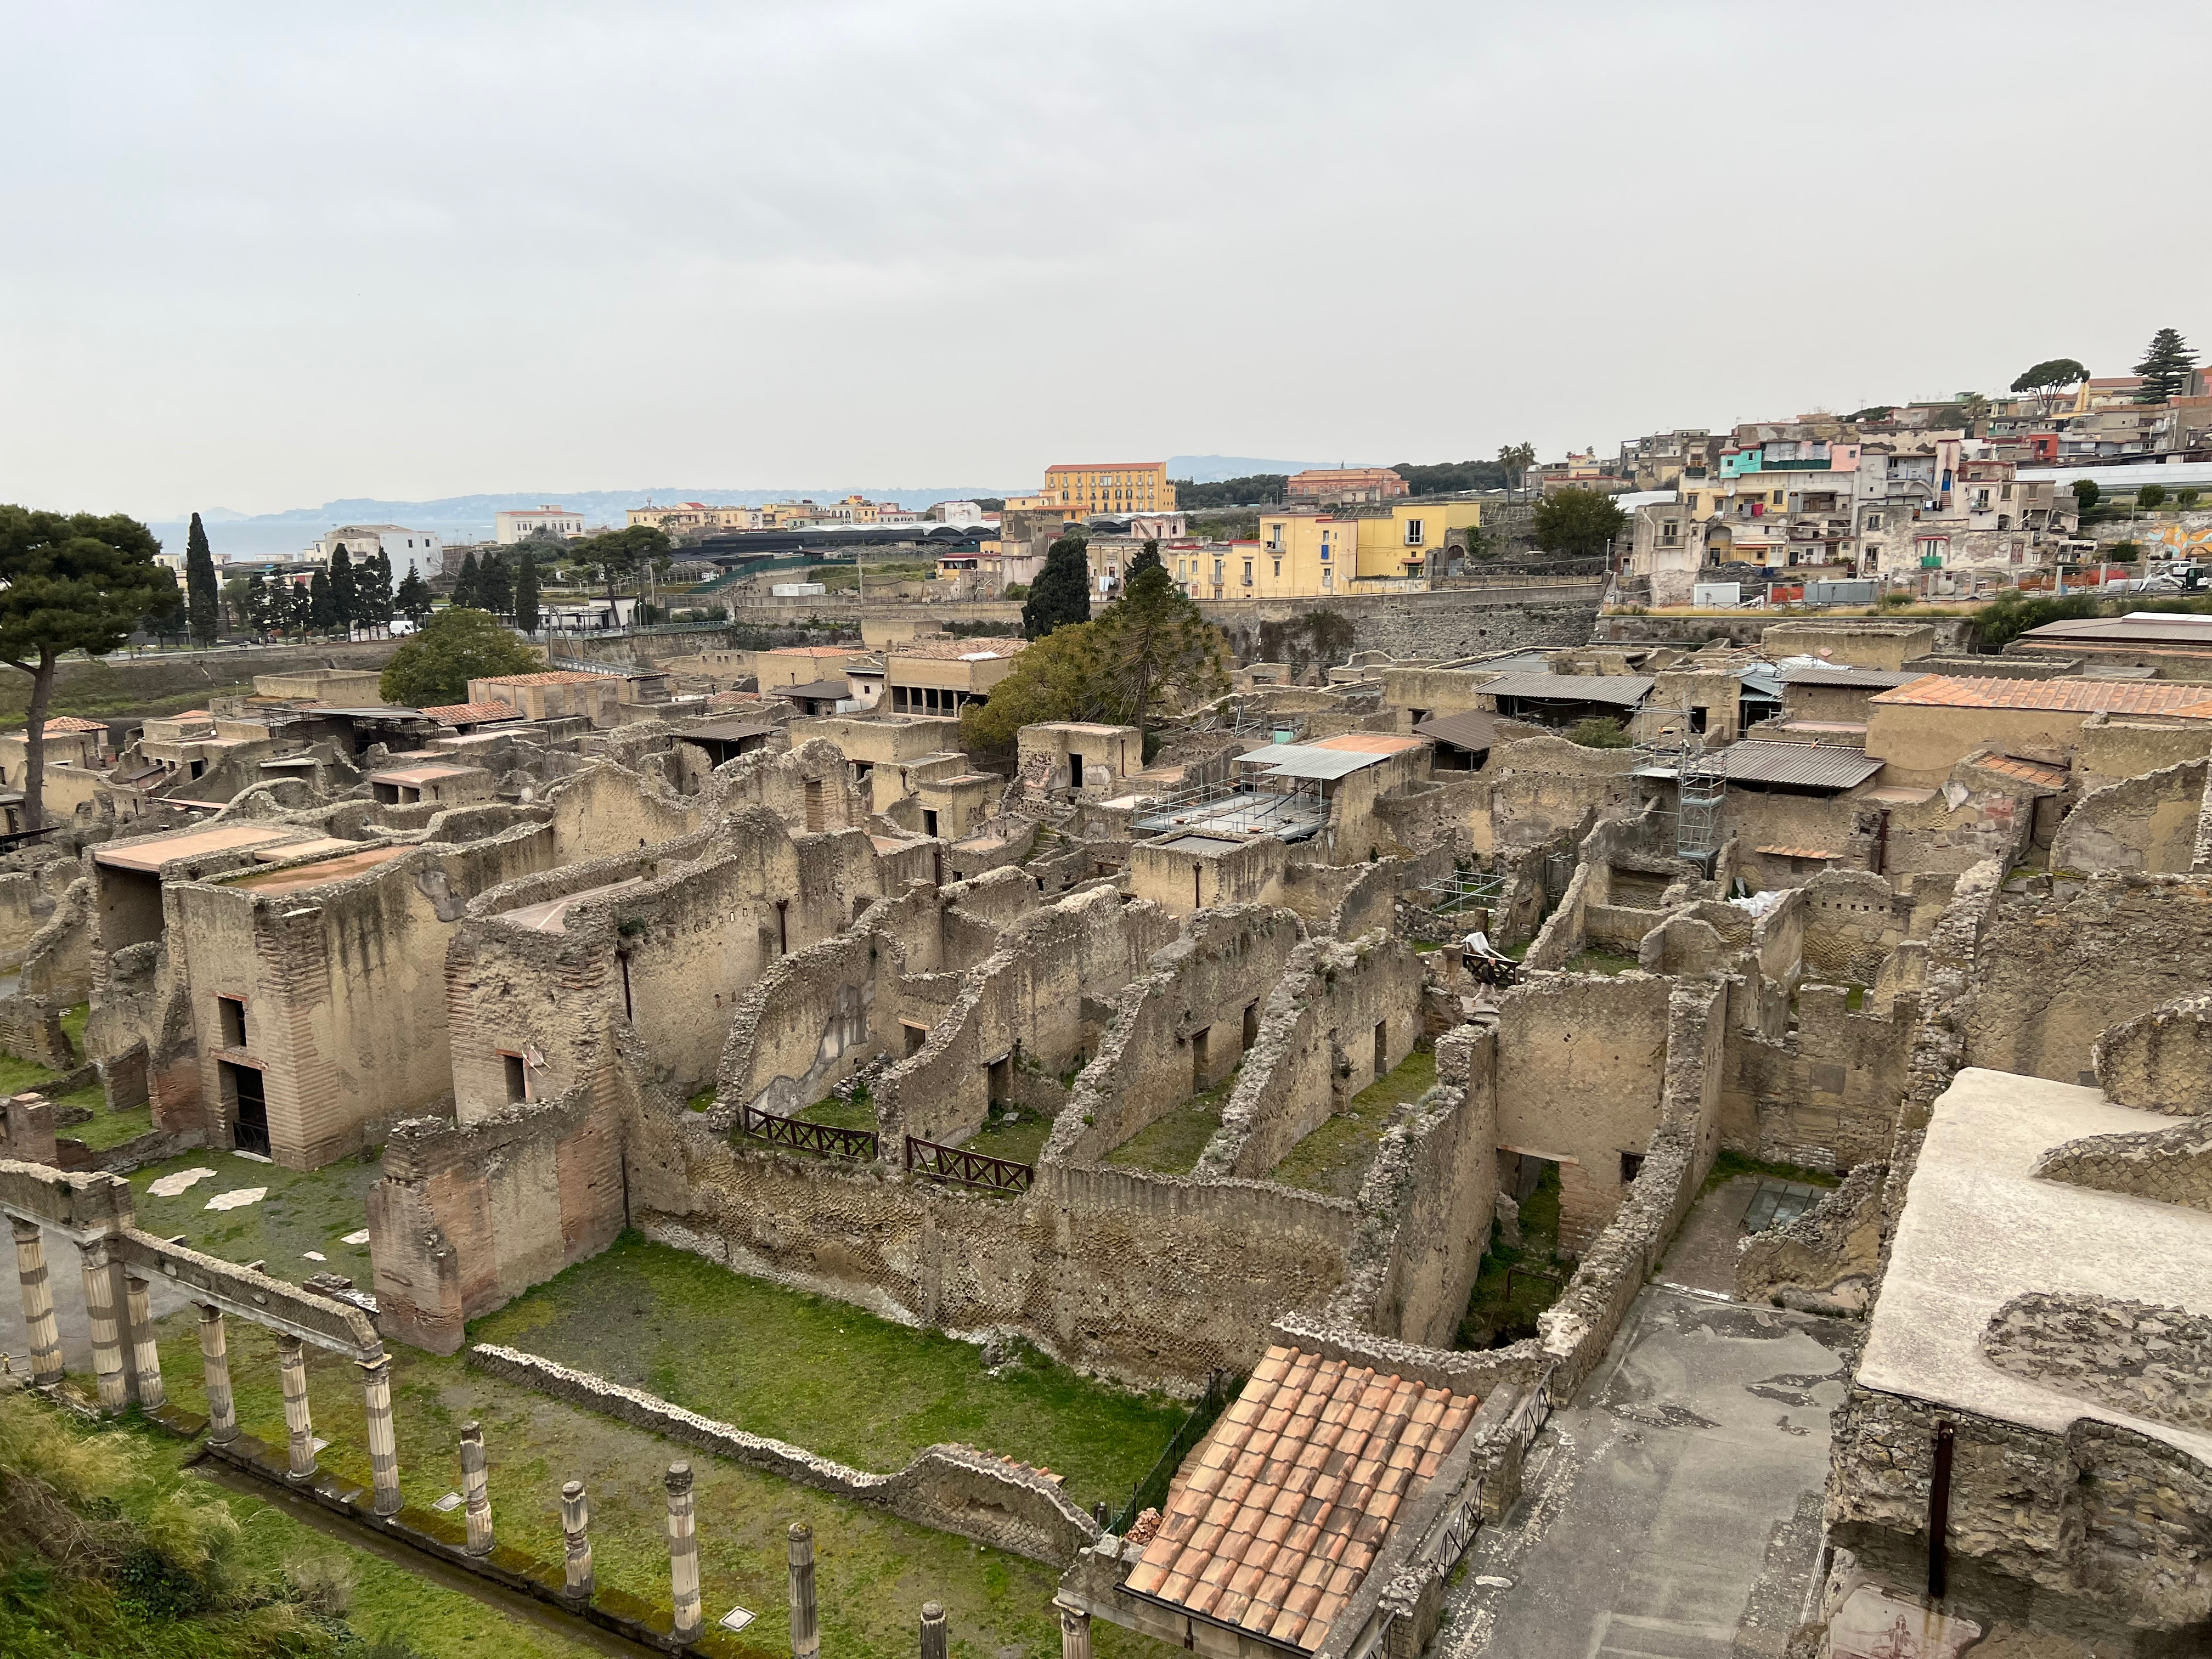 View of the Herculaneum